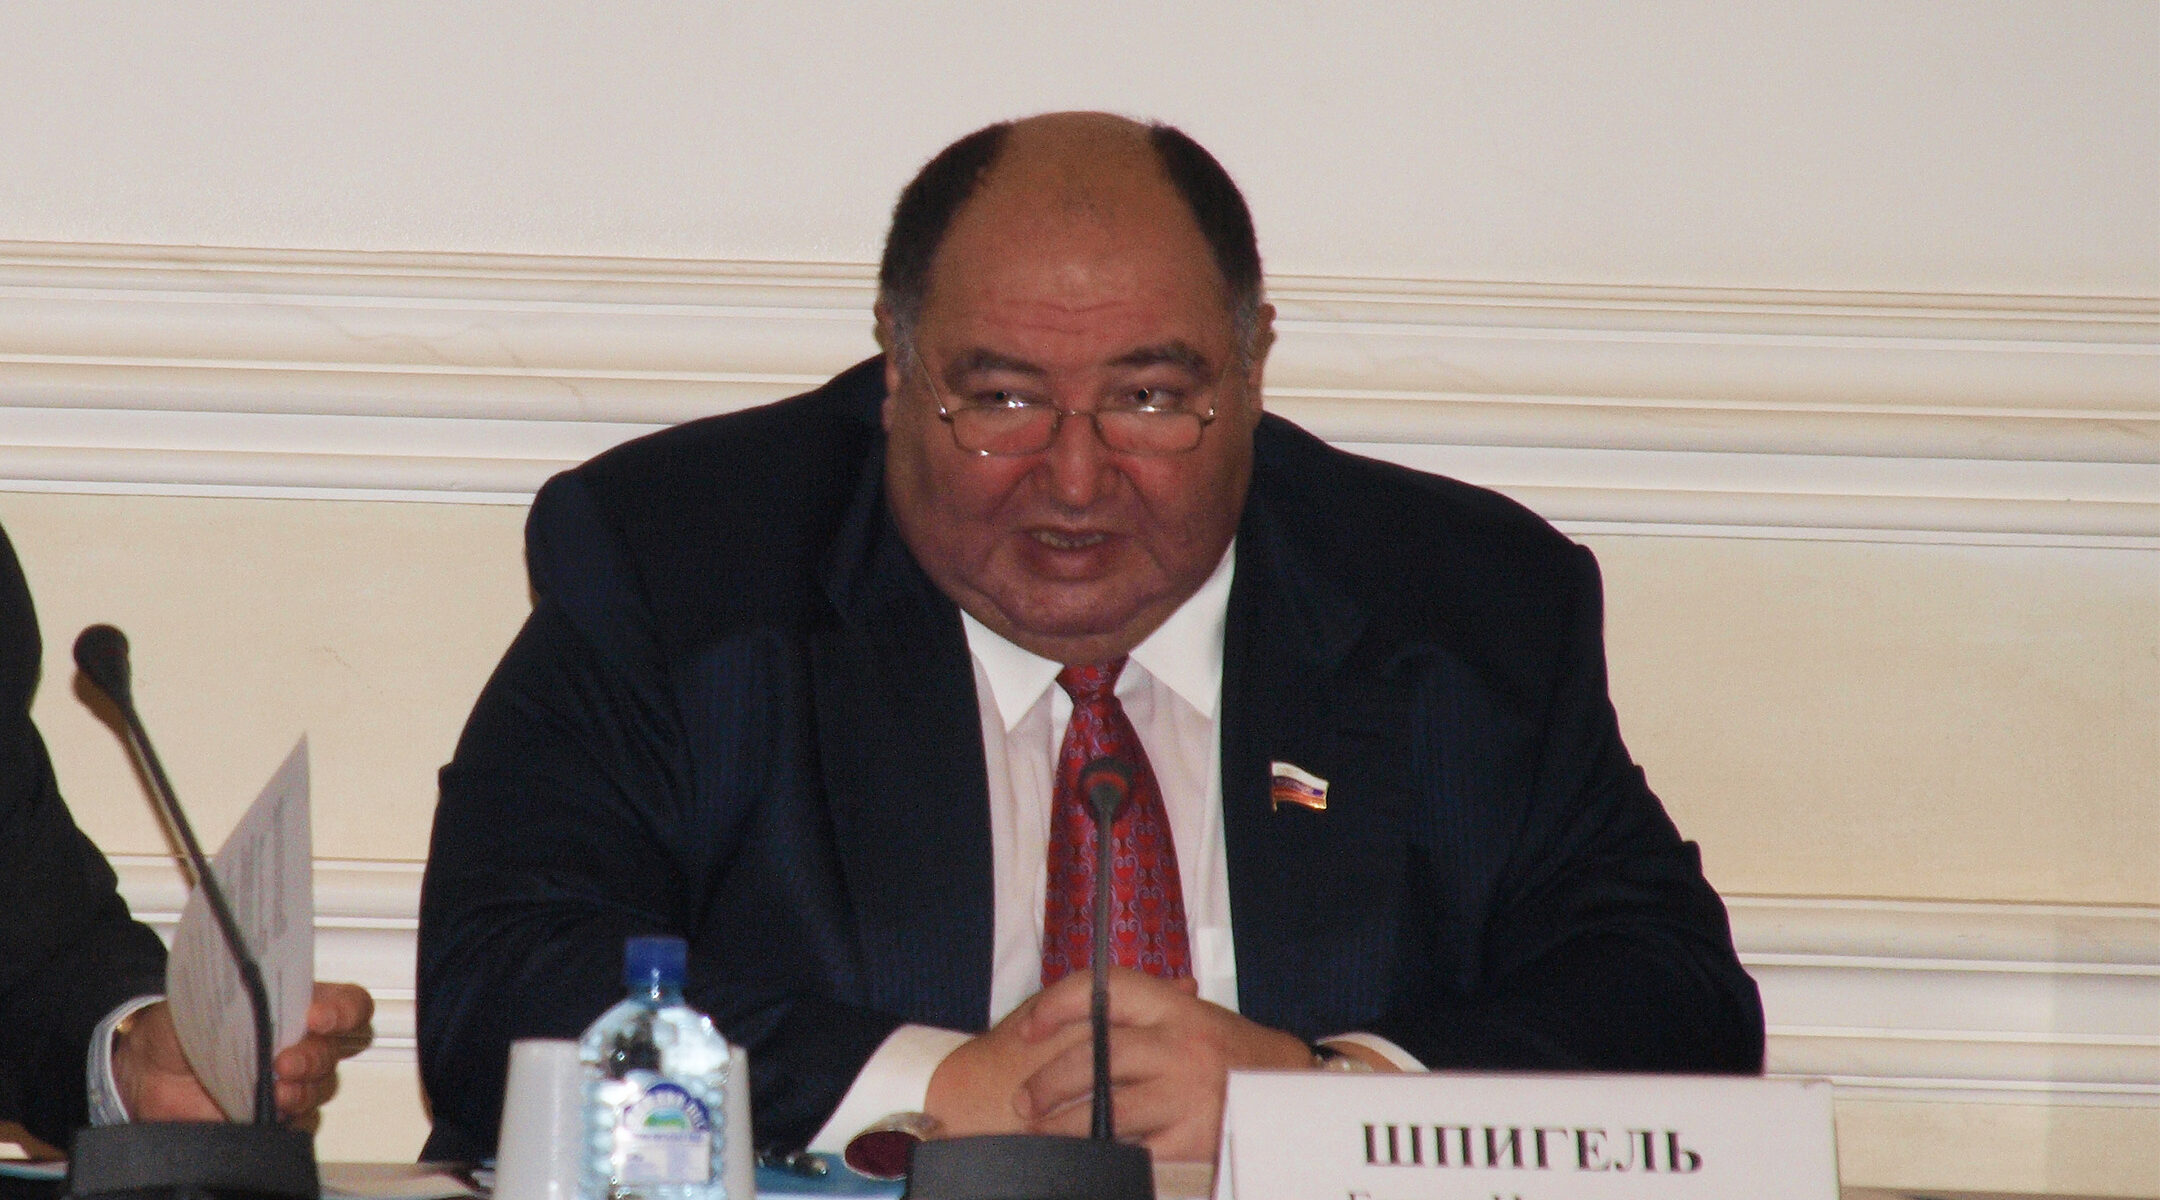 Boris Spiegel speaks during a meeting of the Civic Chamber of the Russian Federation in Yaroslavl, Russia on Nov. 28, 2011. (Public Chamber of the Yaroslavl Region)